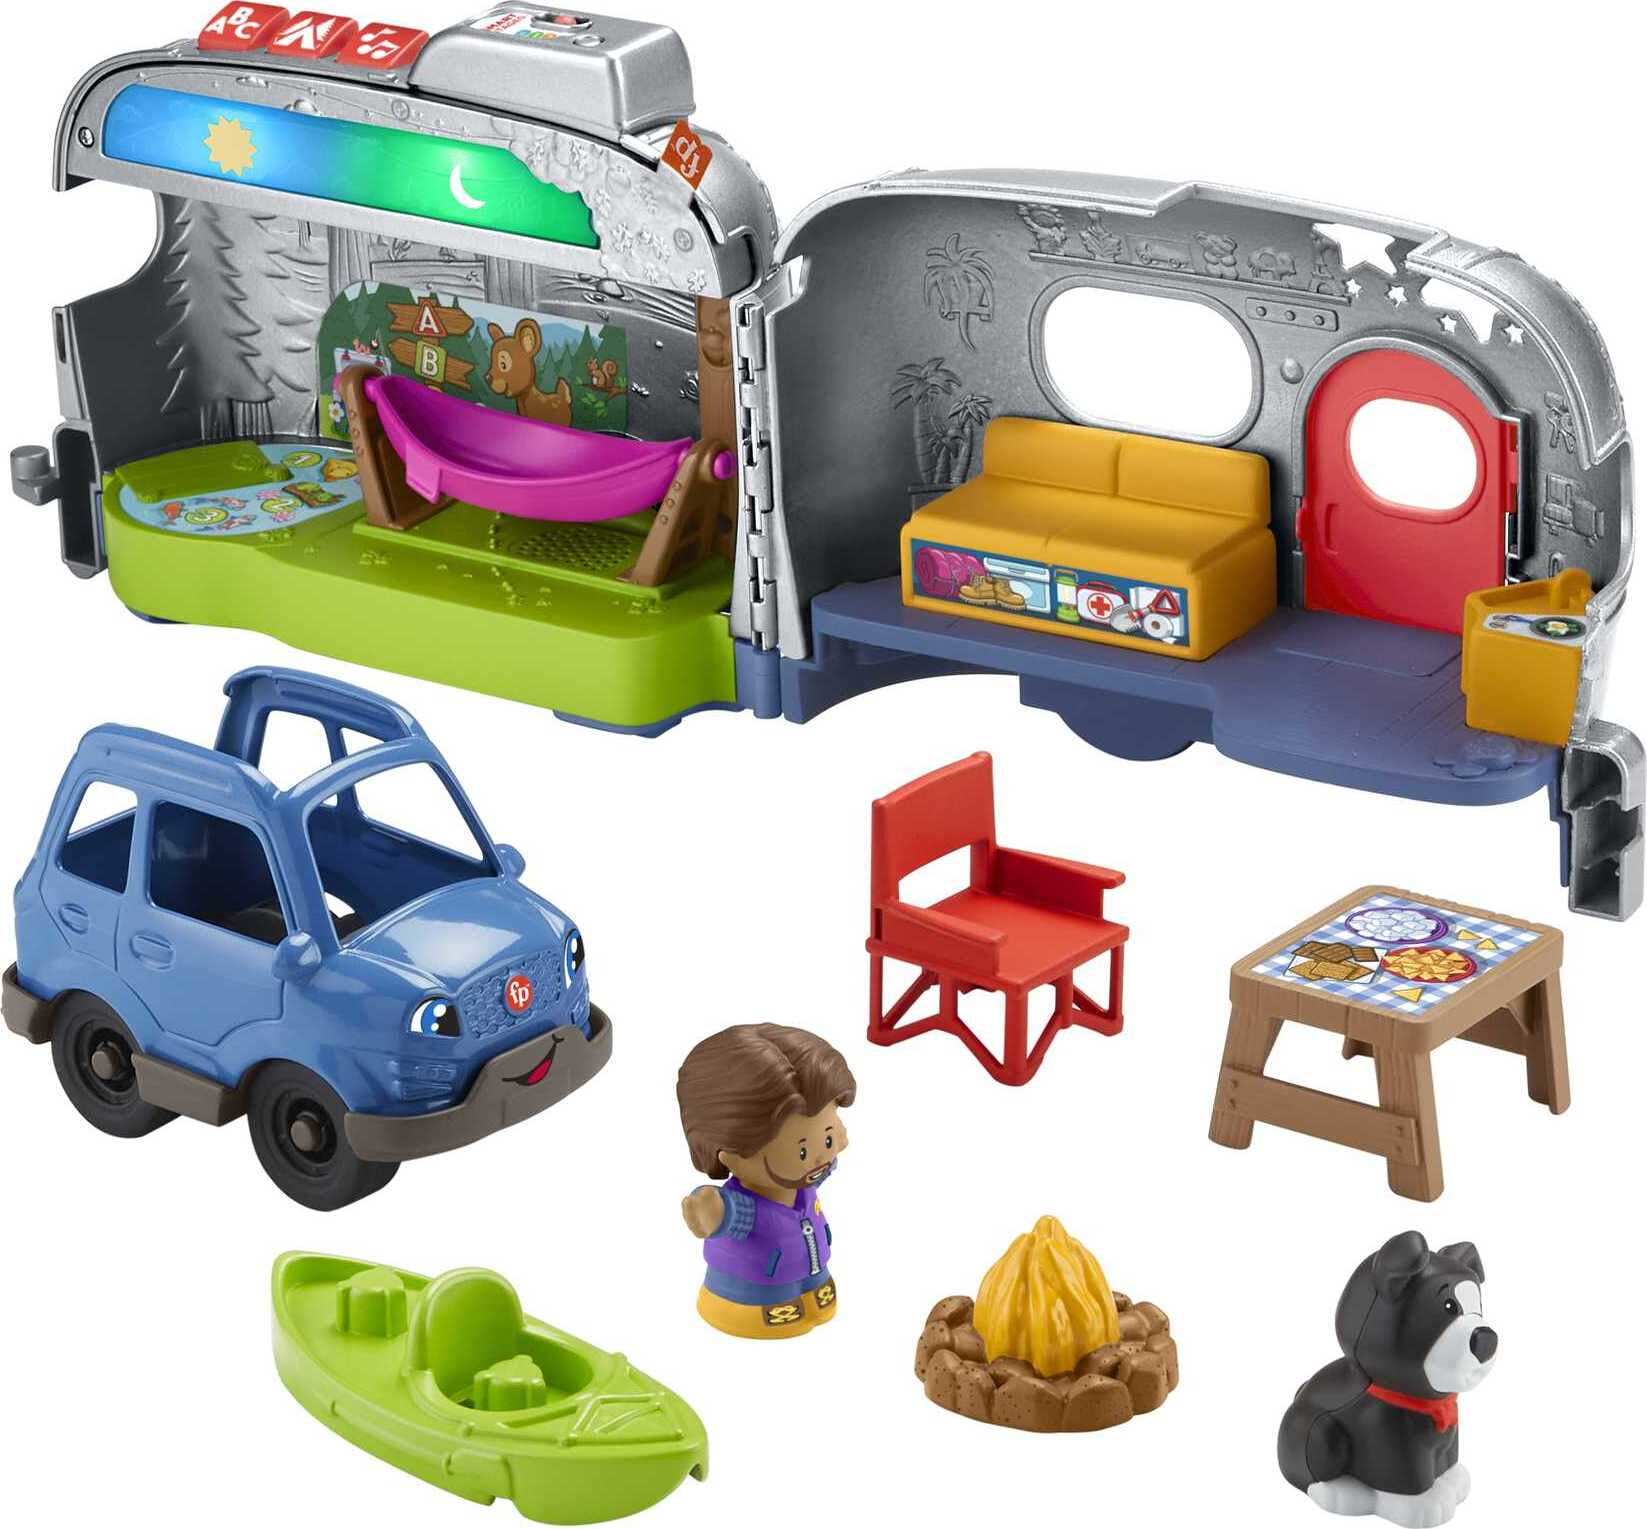 Fisher-Price Little People Light-Up Learning Camper Electronic Toy RV for Toddlers, 8 Pieces